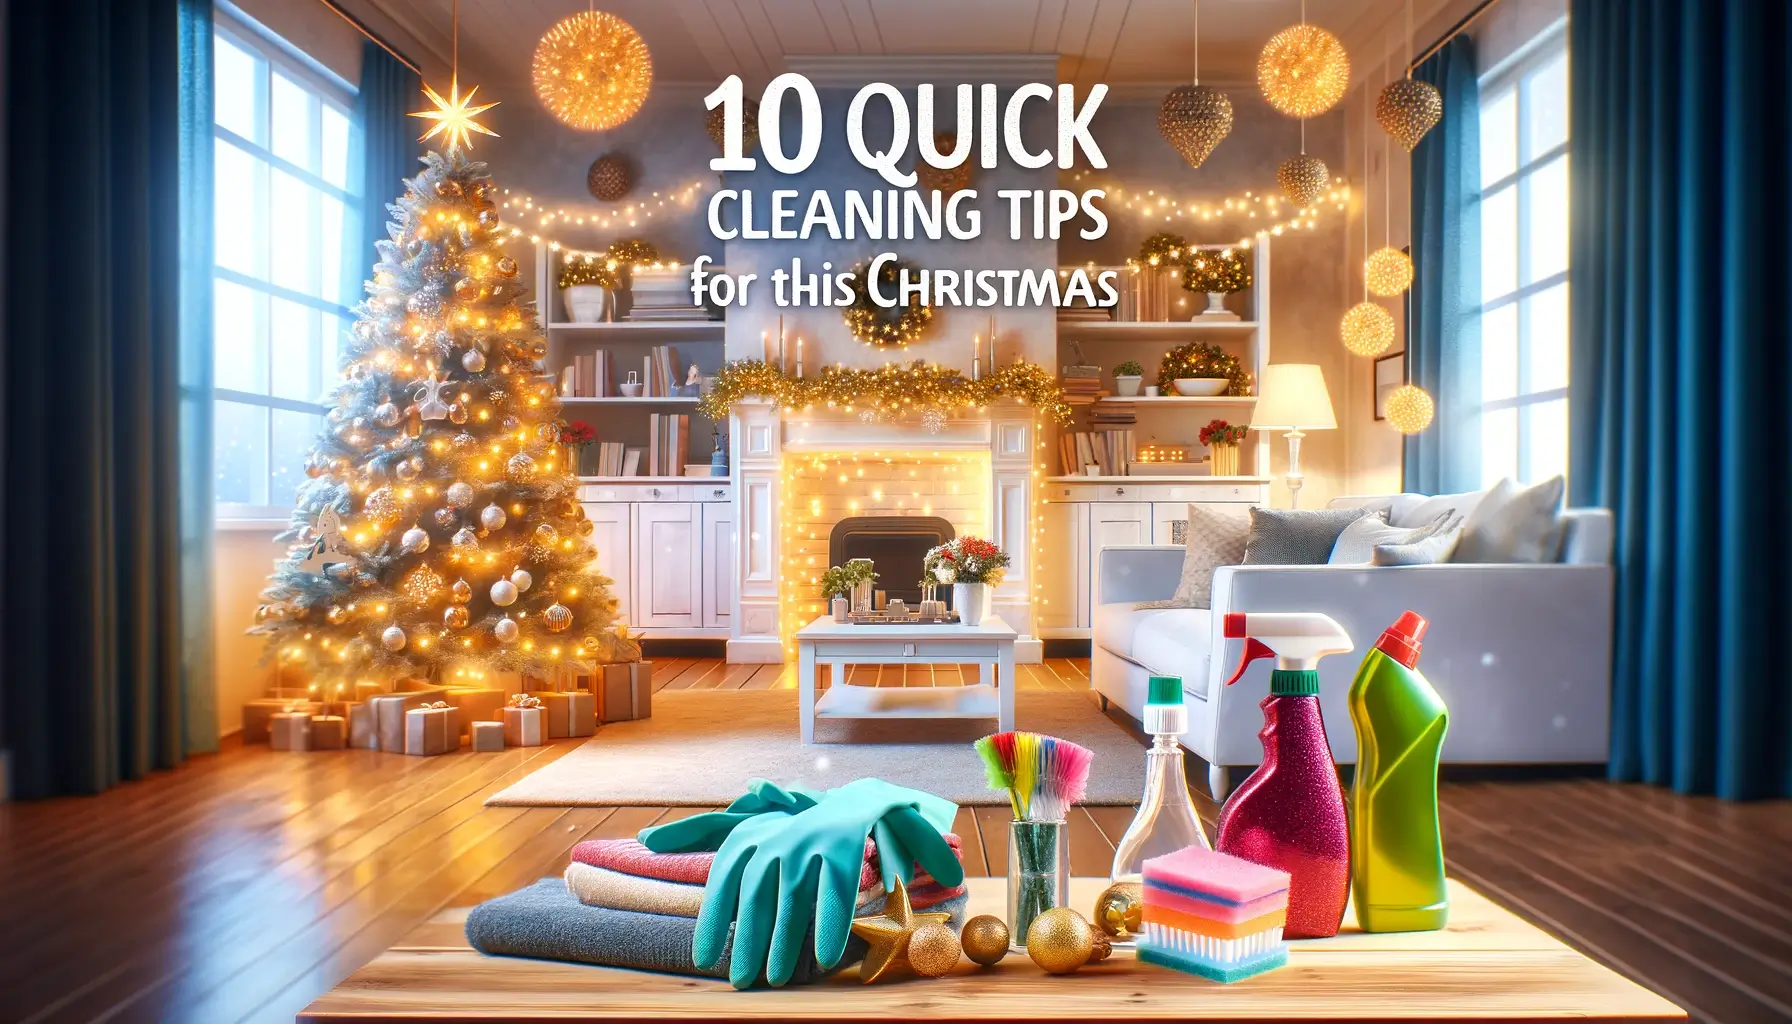 10 Quick Cleaning Tips to Get Your Home Ready for Christmas Guests